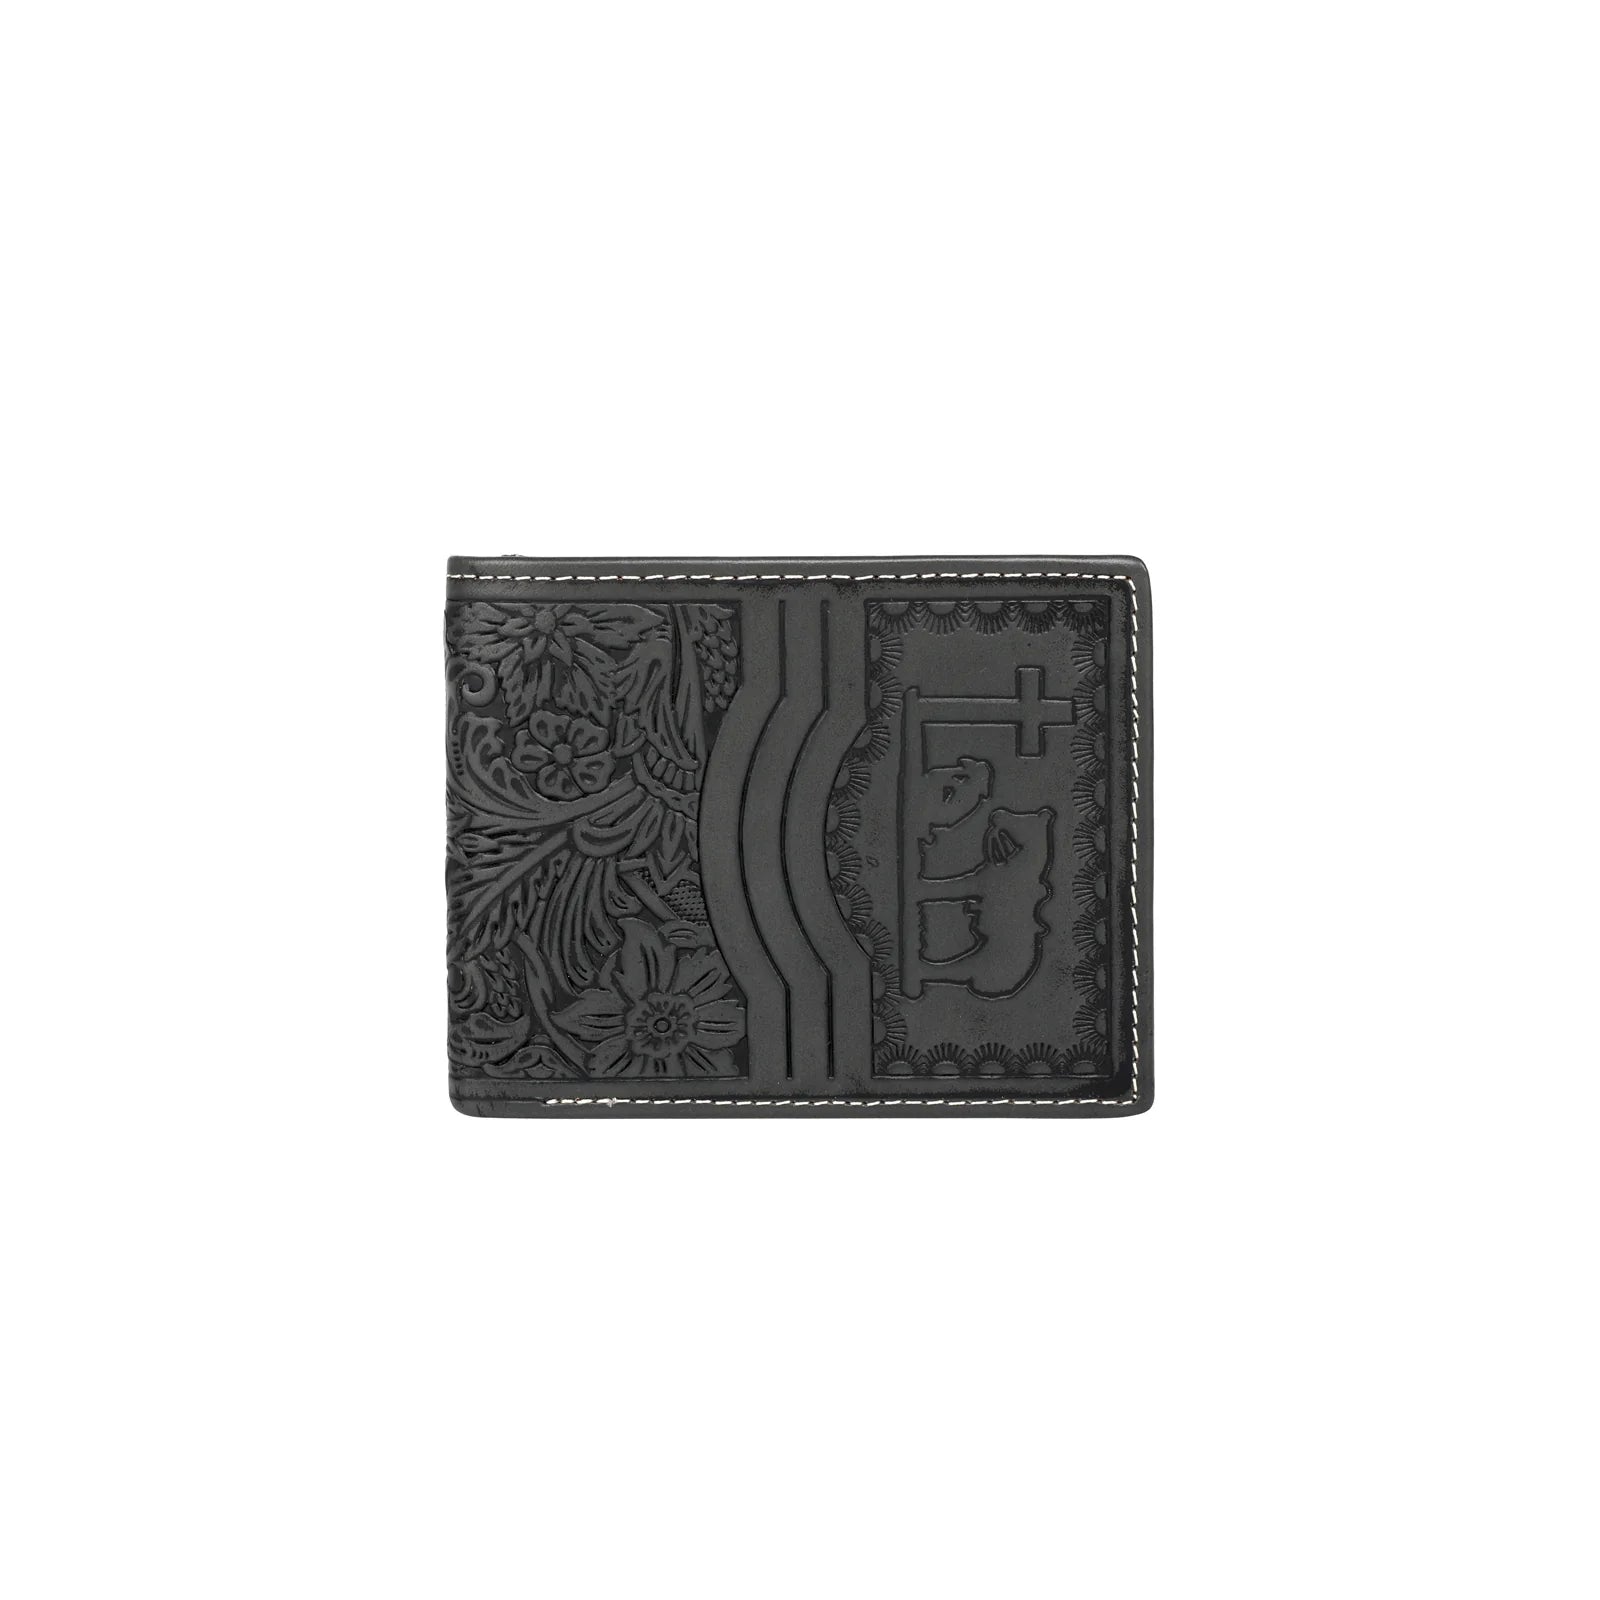 Genuine Tooled Leather Collection Men's Wallet